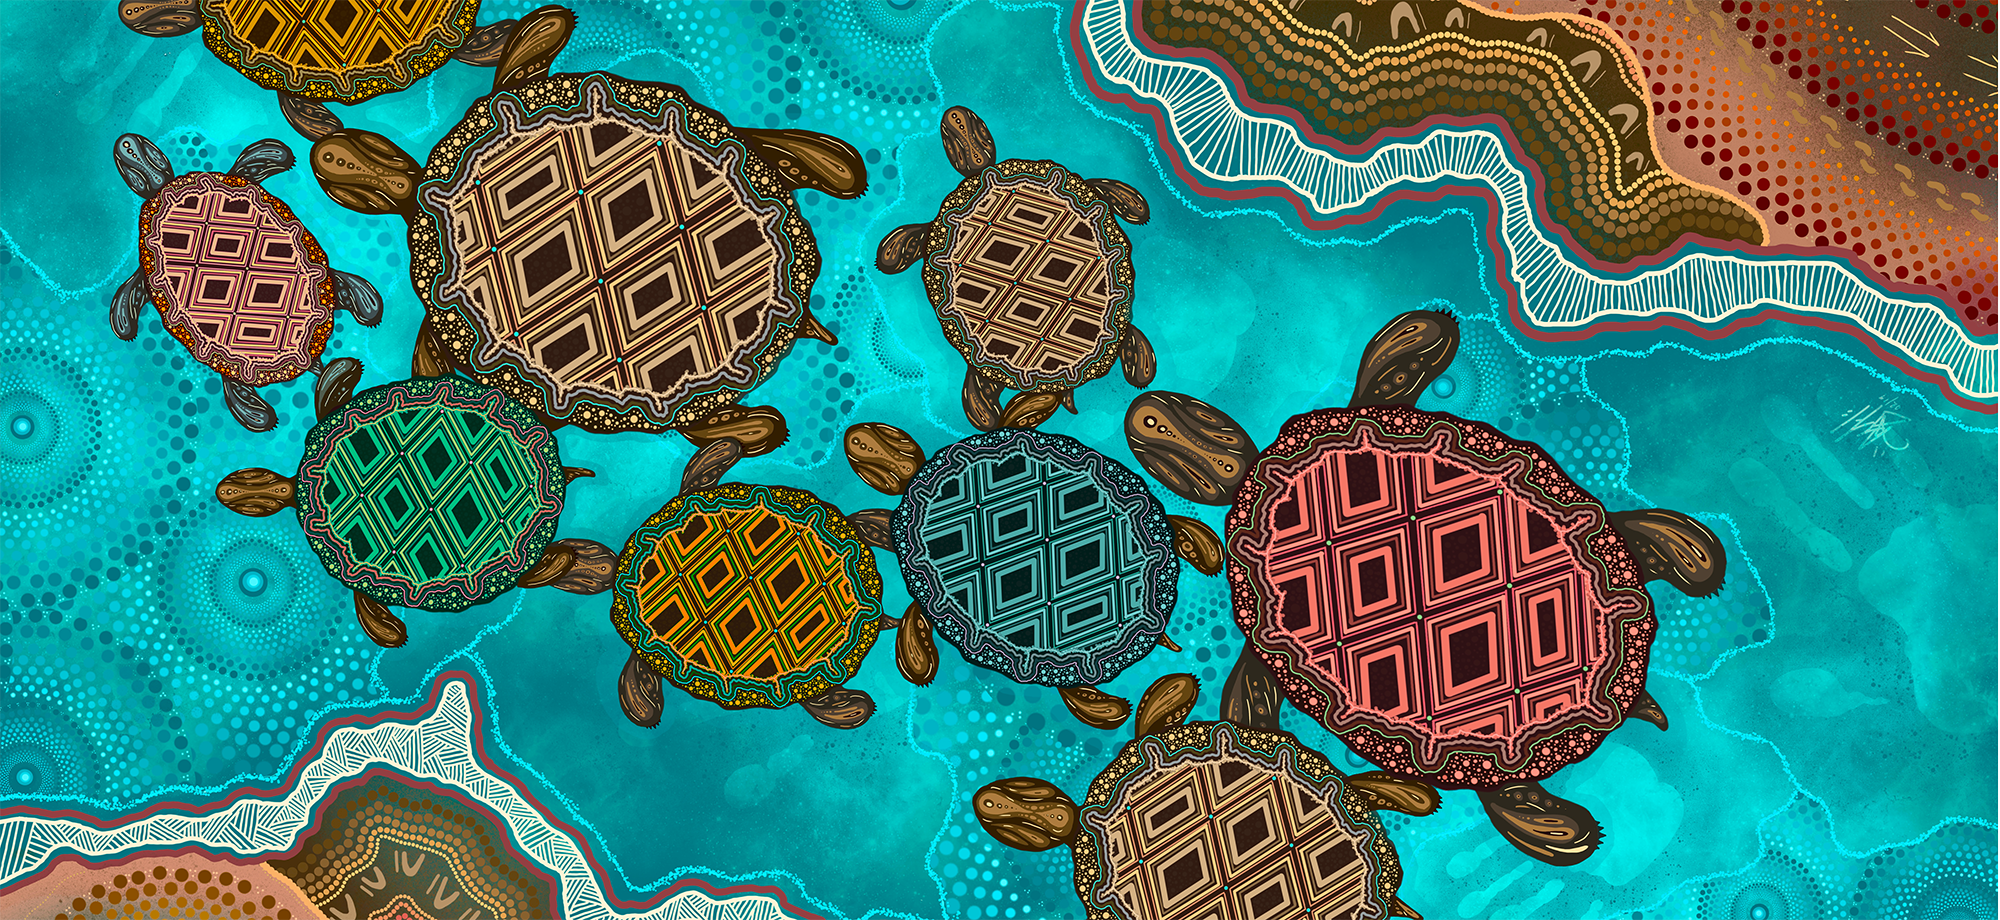 Artwork depicting a group of turtles swimming in a river